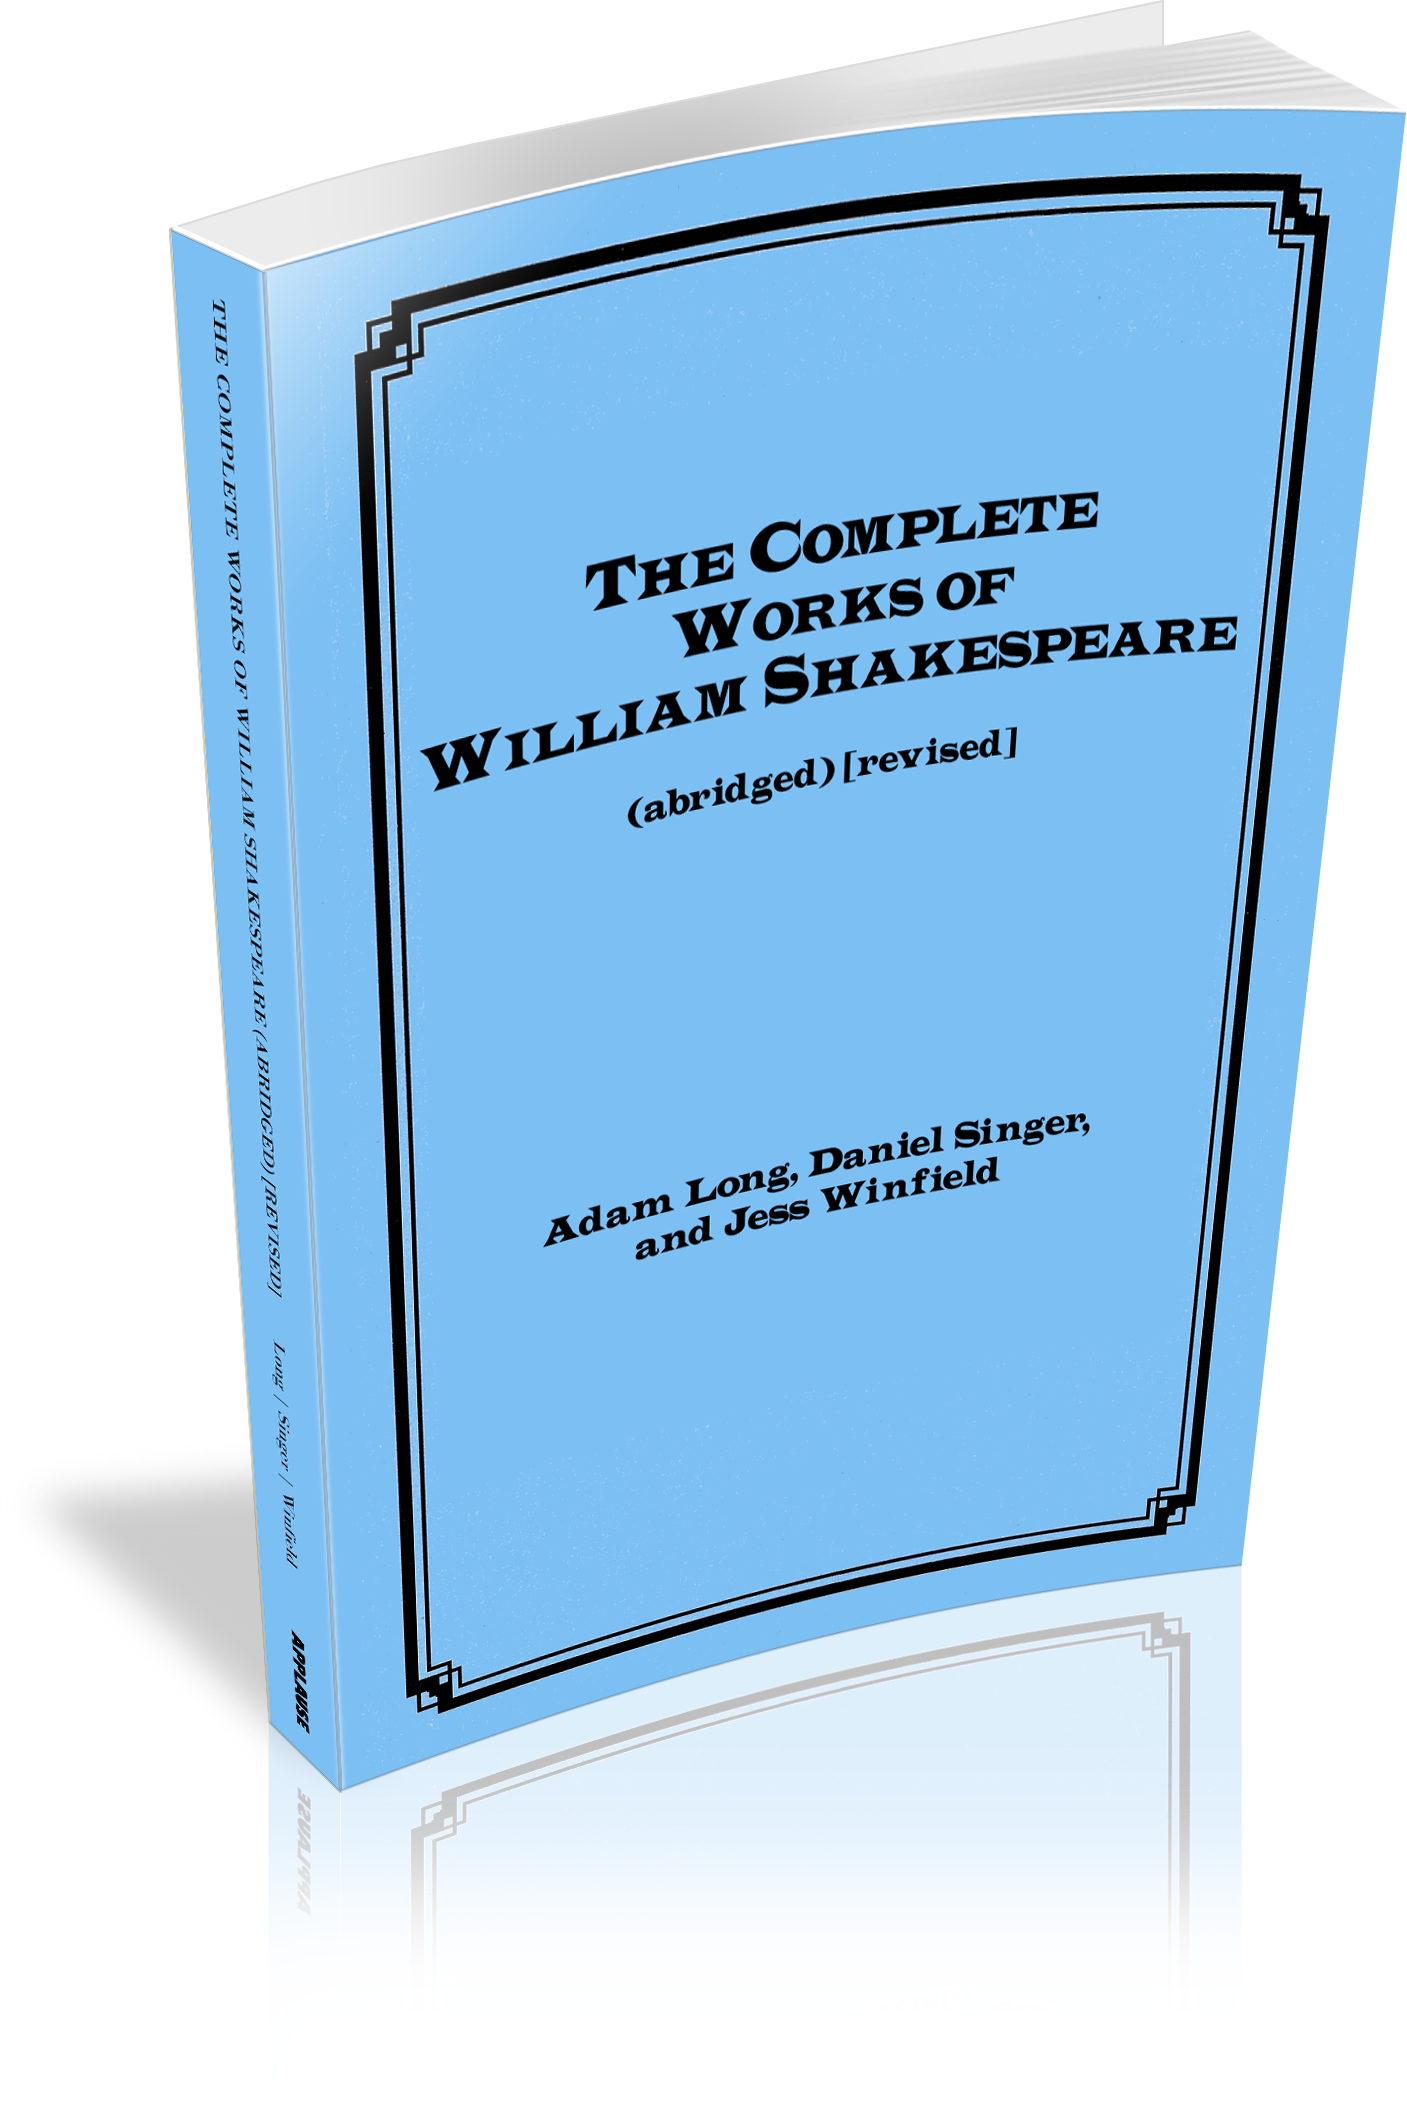 The Complete Works of William Shakespeare (abridged) revised photo